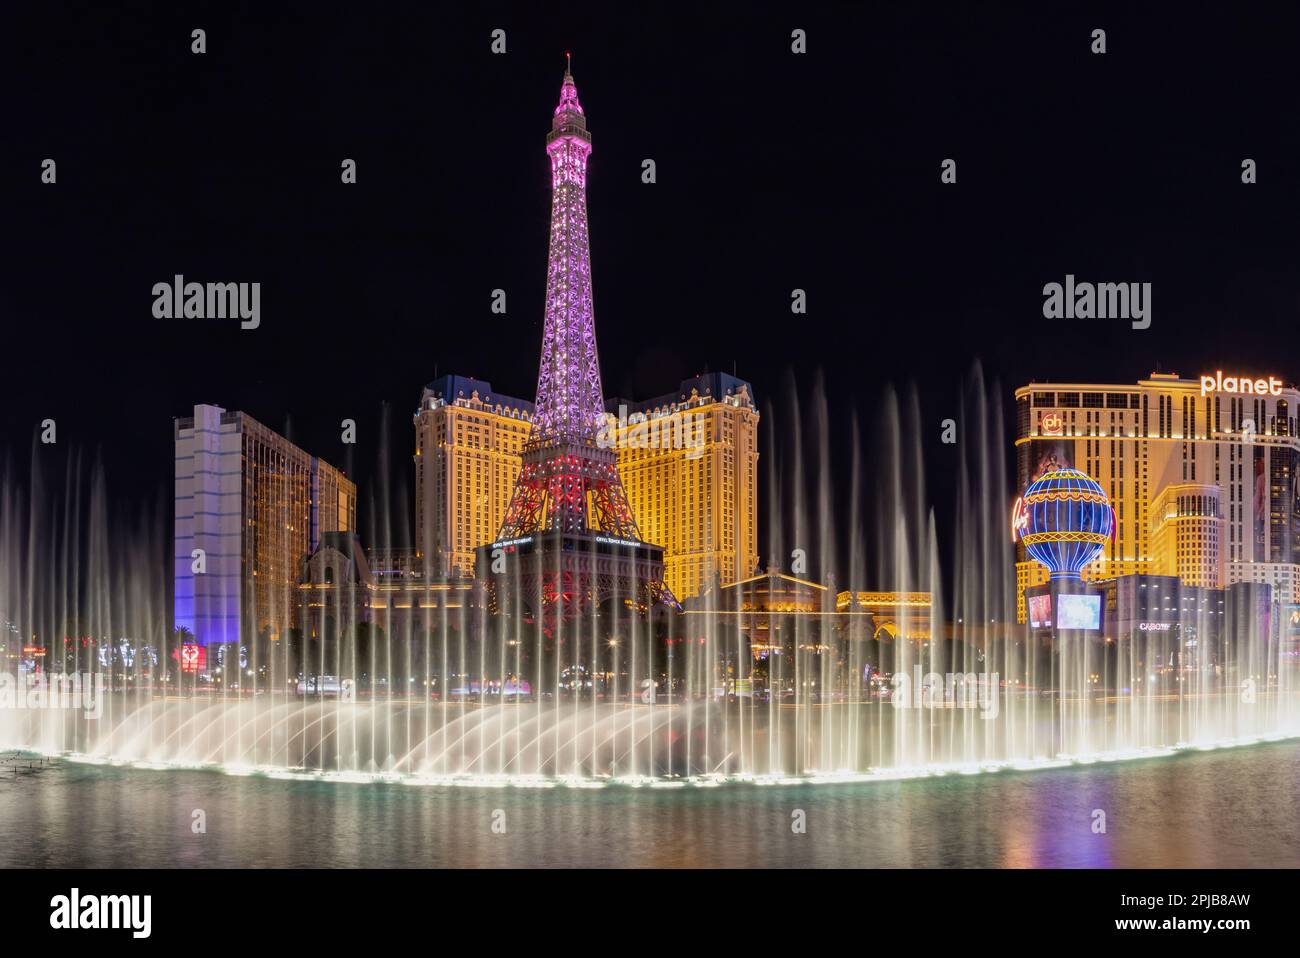 A picture of the Bellagio Fountain Water Show at night, with the Eiffel Tower of the Paris Las Vegas behind it. Stock Photo